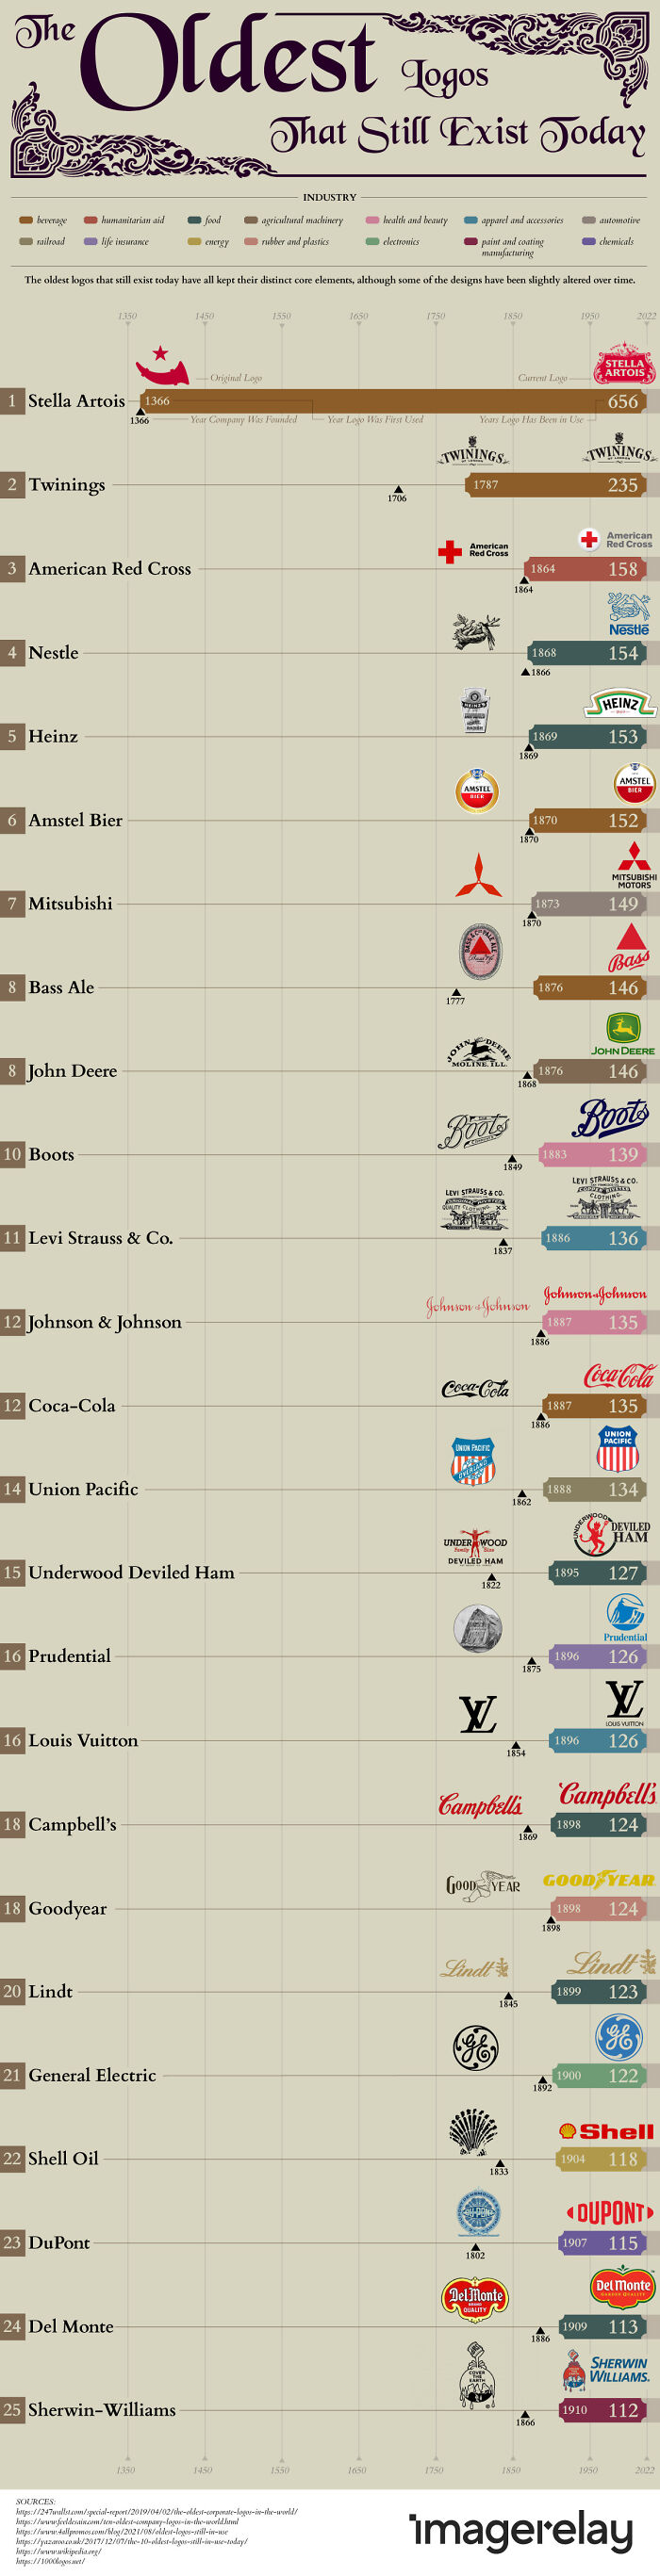 The Oldest Logos That Are Still In Existence Today (Based On Distinct Core Elements Still Being Used)